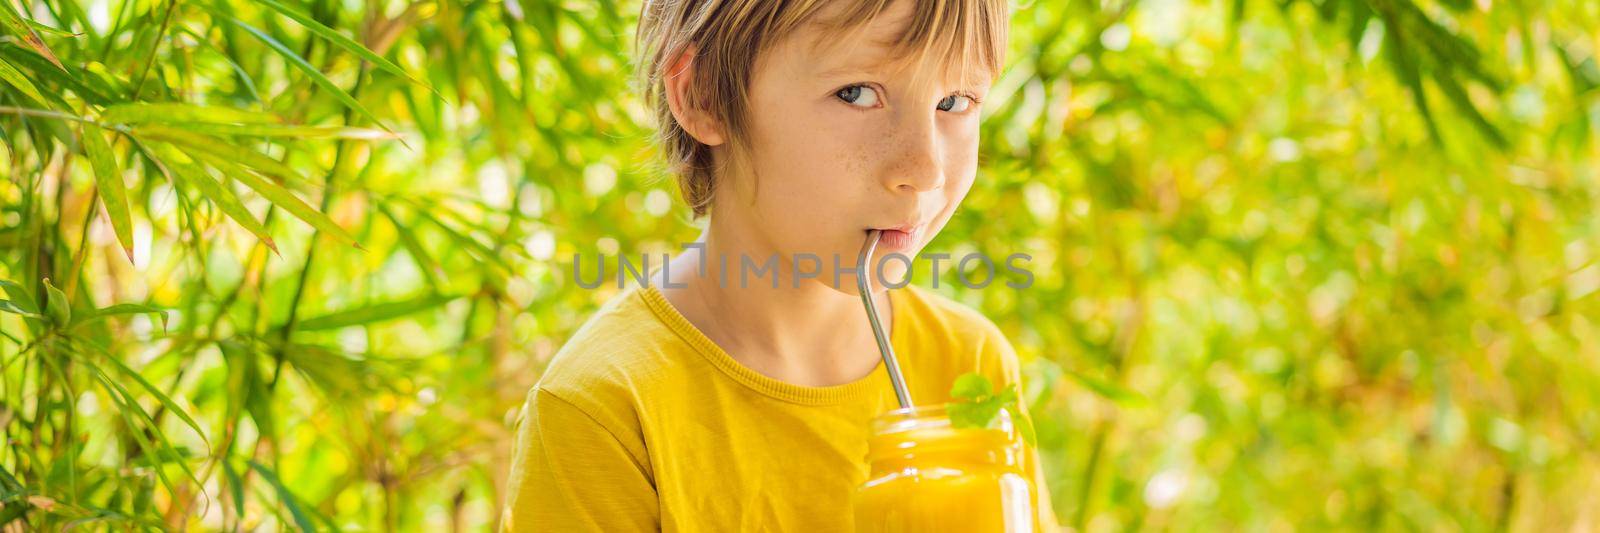 Boy drinking juicy smoothie from mango in glass mason jar. Healthy life concept, copy space. BANNER, LONG FORMAT